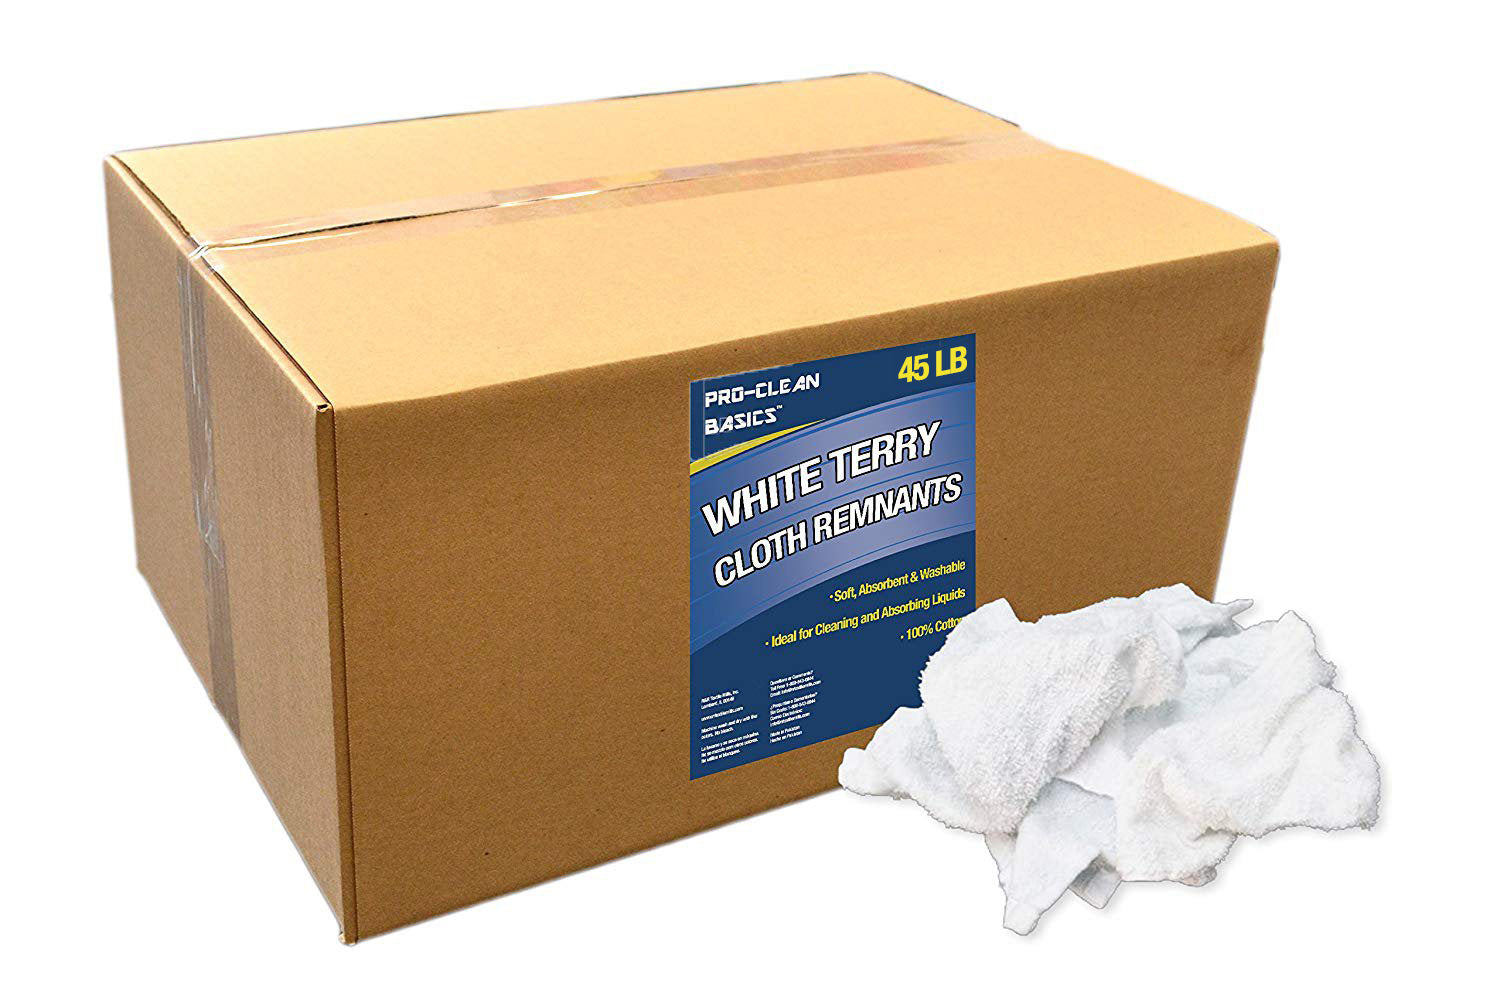 Terry Bar Mop Towels - 25 lbs Box , Affordable Wipers